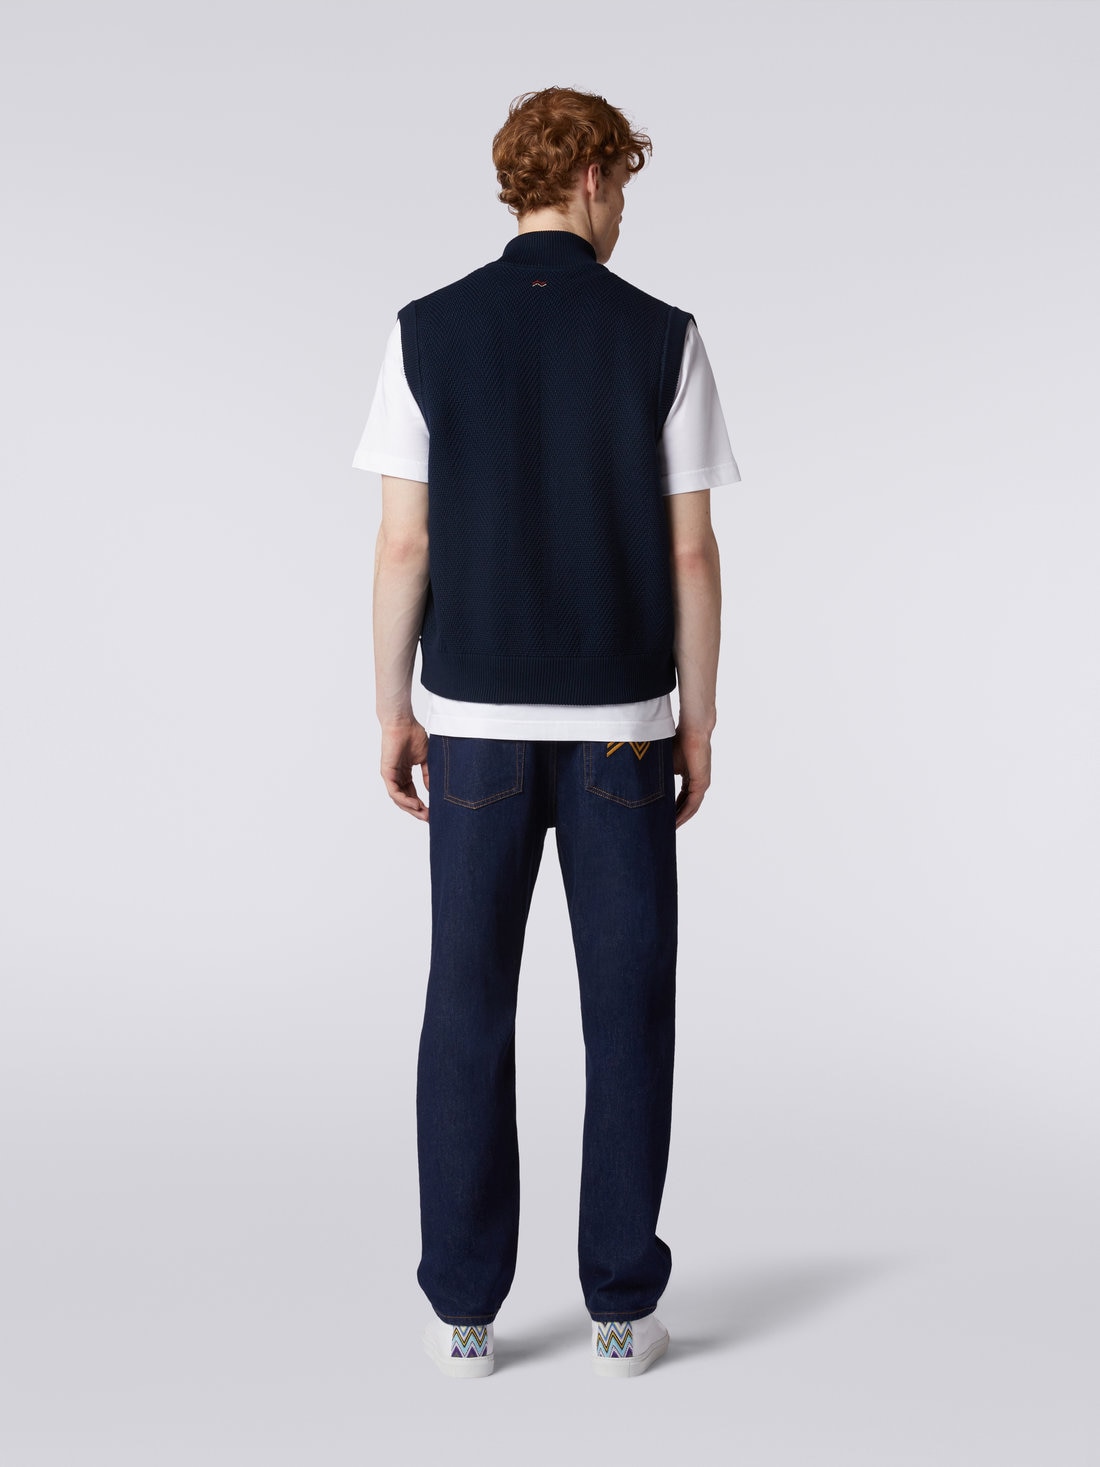 Zigzag stitched waistcoat with knitted back and piping, Navy Blue  - 3